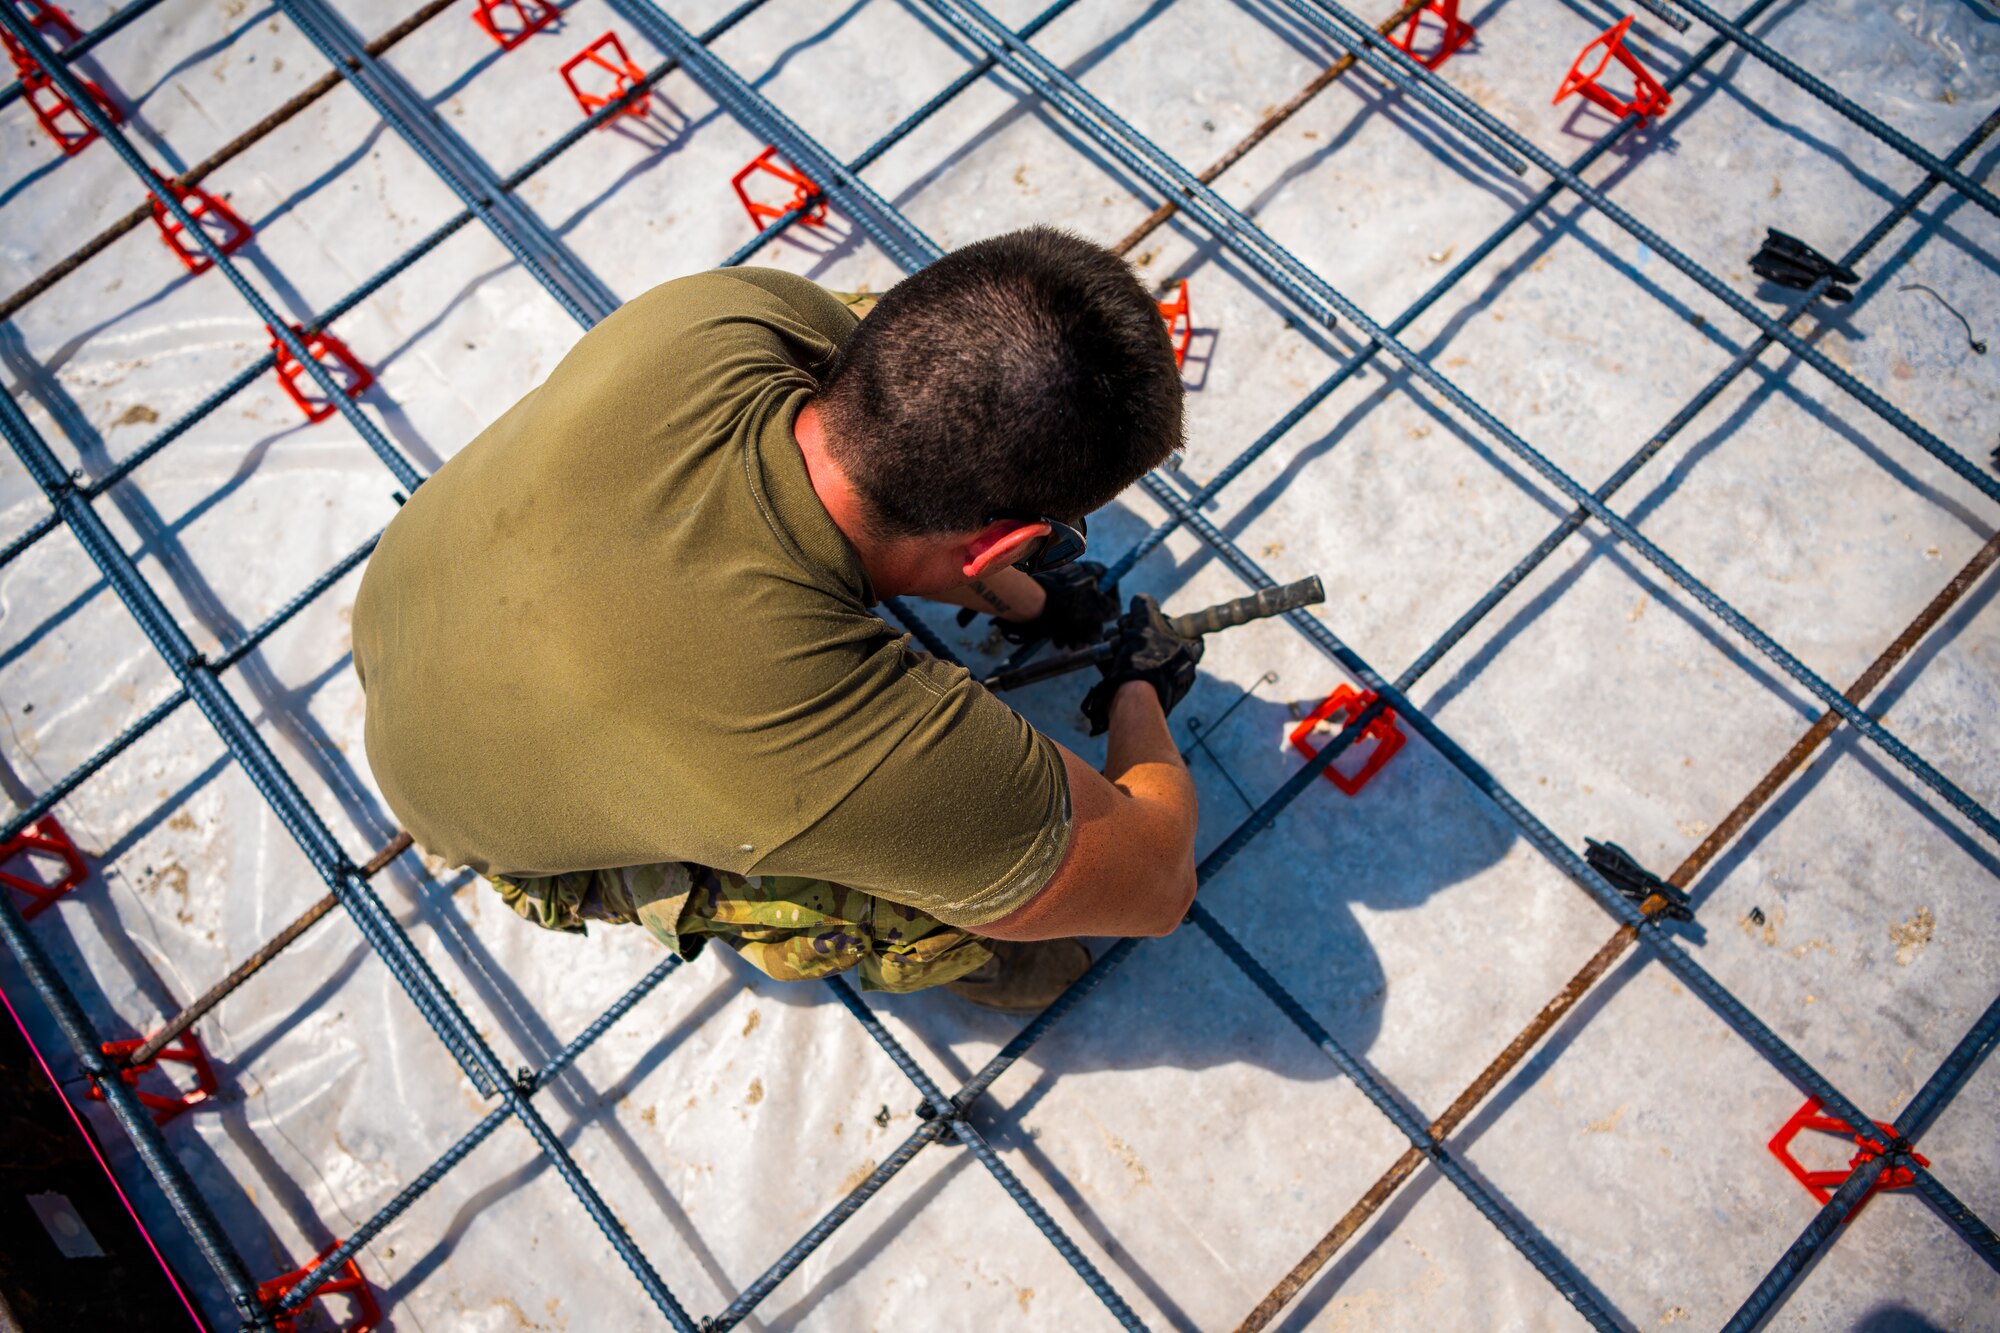 U.S. Air Force Airmen from the 1st Expeditionary Civil Engineer Group (ECEG) and 380th Expeditionary Civil Engineer Squadron lay foundation for expansion at Al Dhafra Air Base, United Arab Emirates, Aug. 18, 2021.